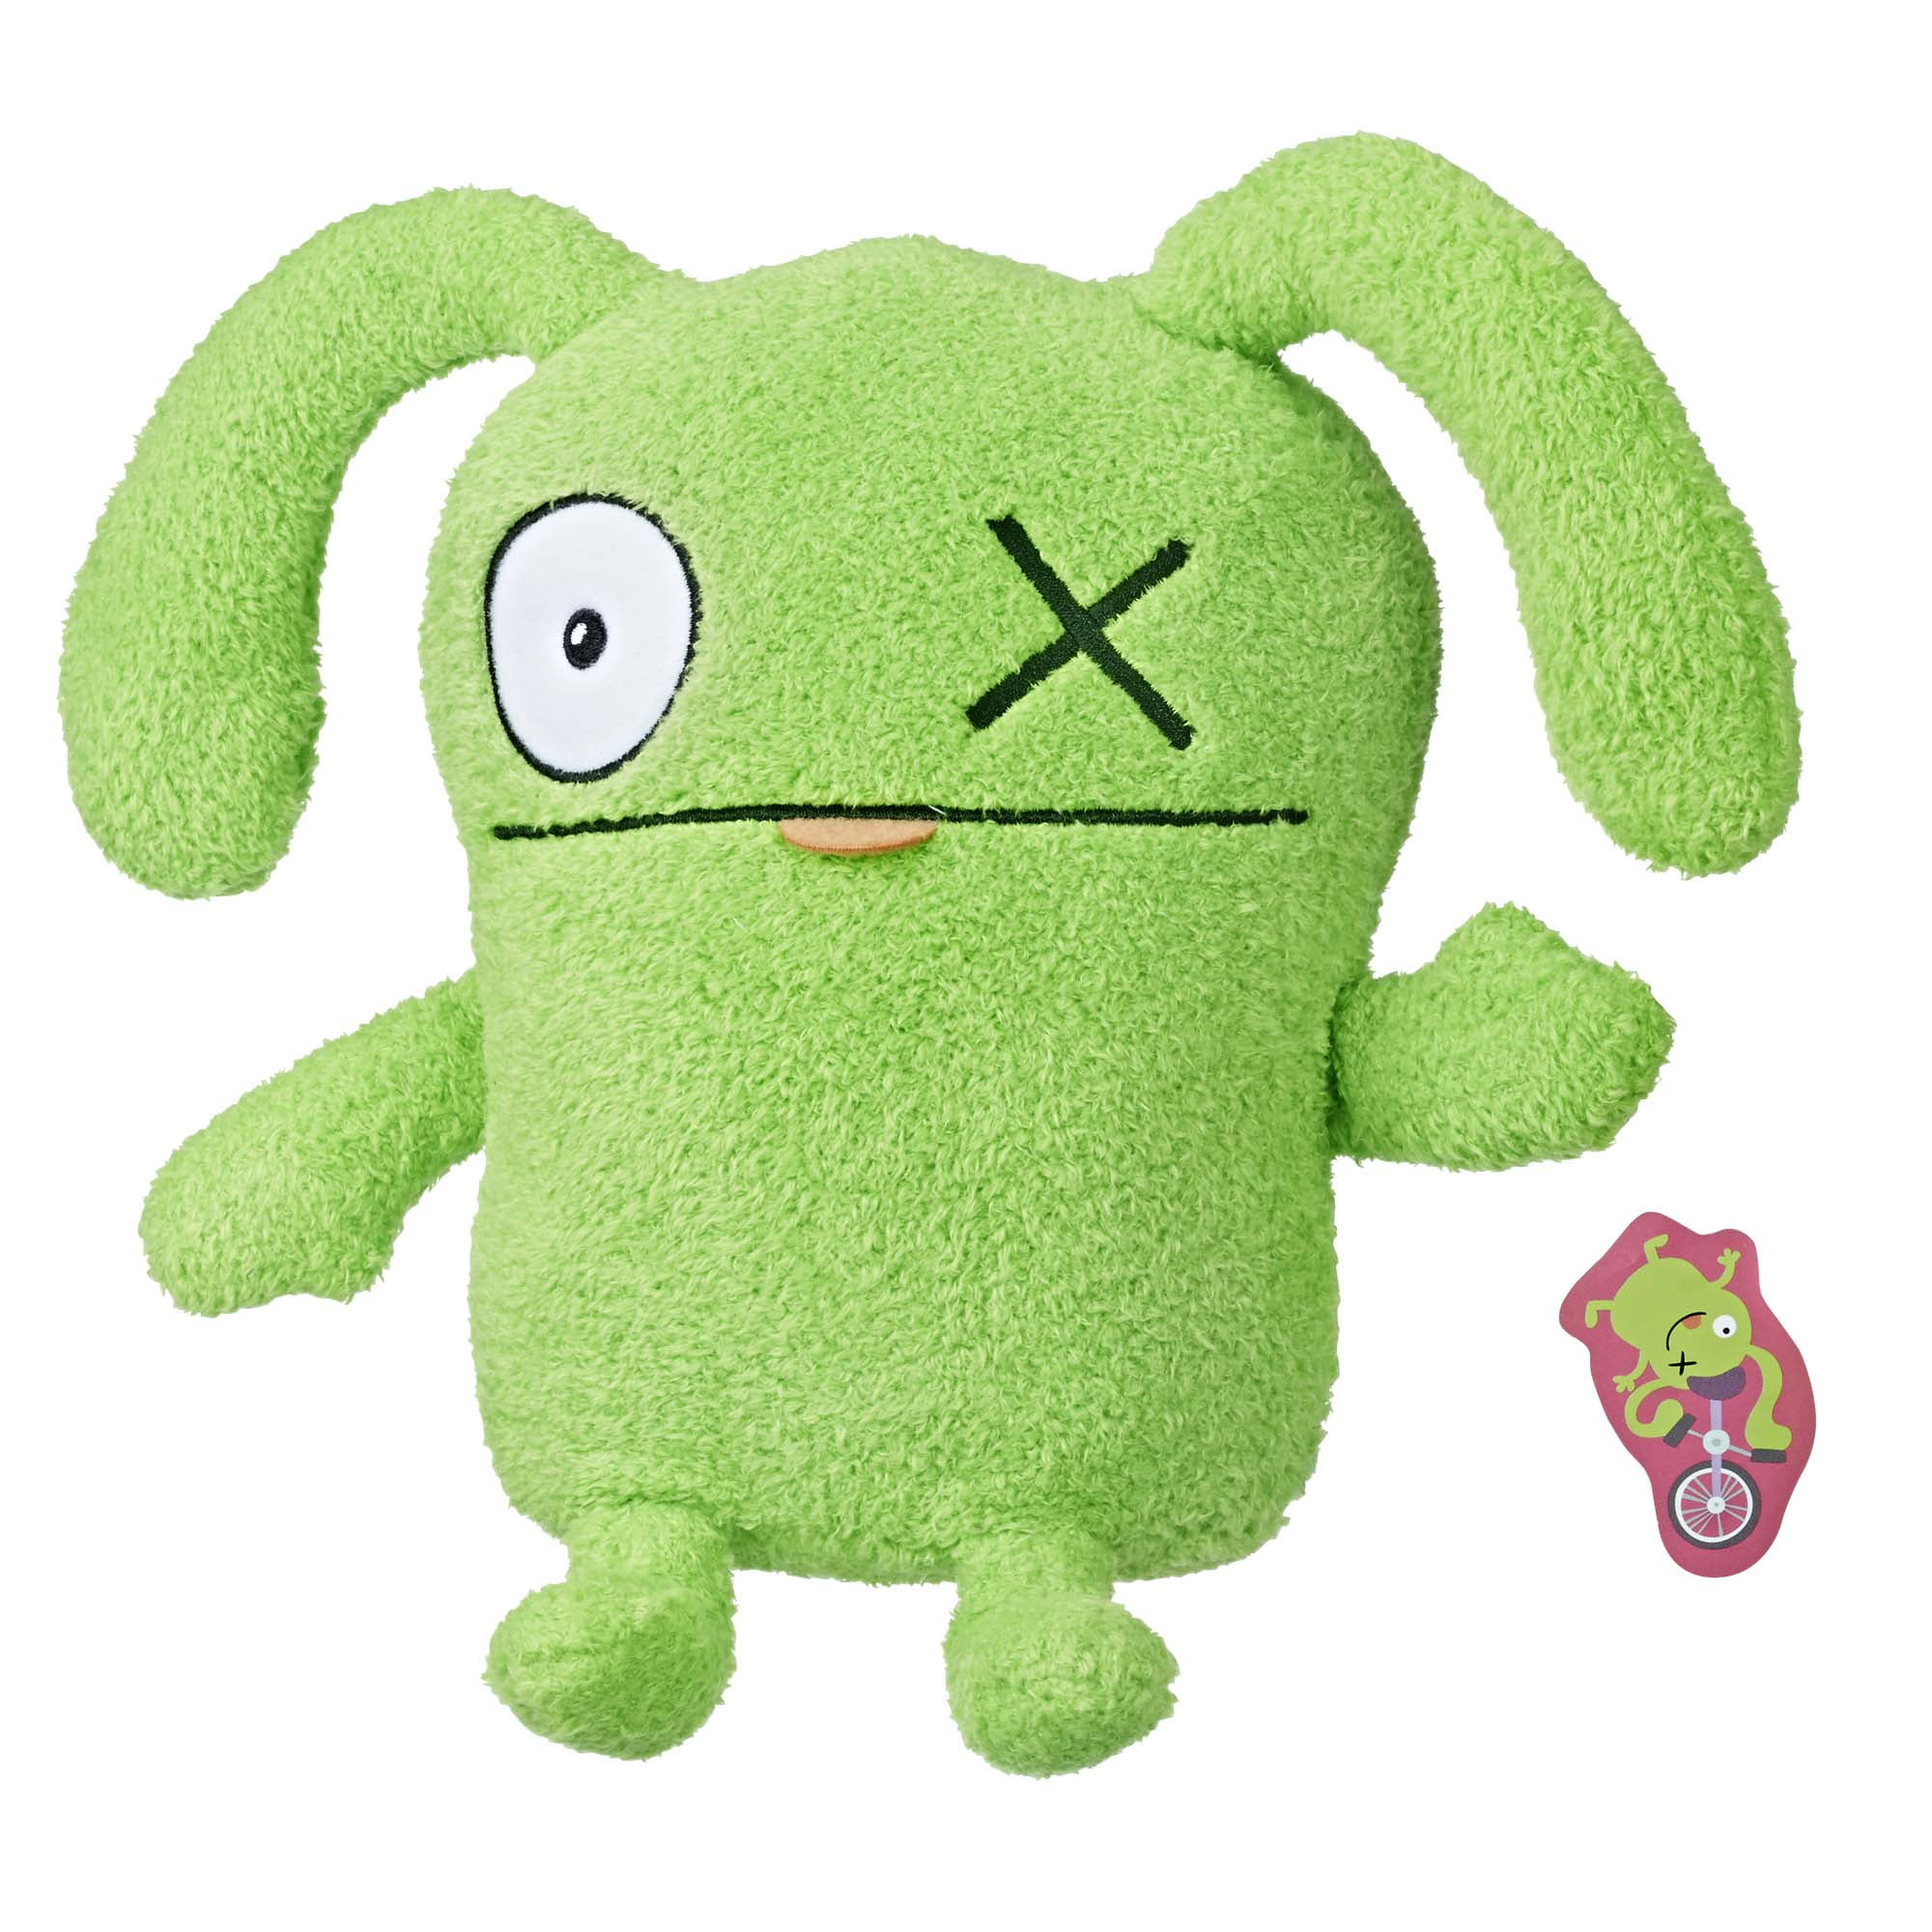 Uglydoll Jokingly Yours Ox Stuffed Plush Toy 9.5" Tall 